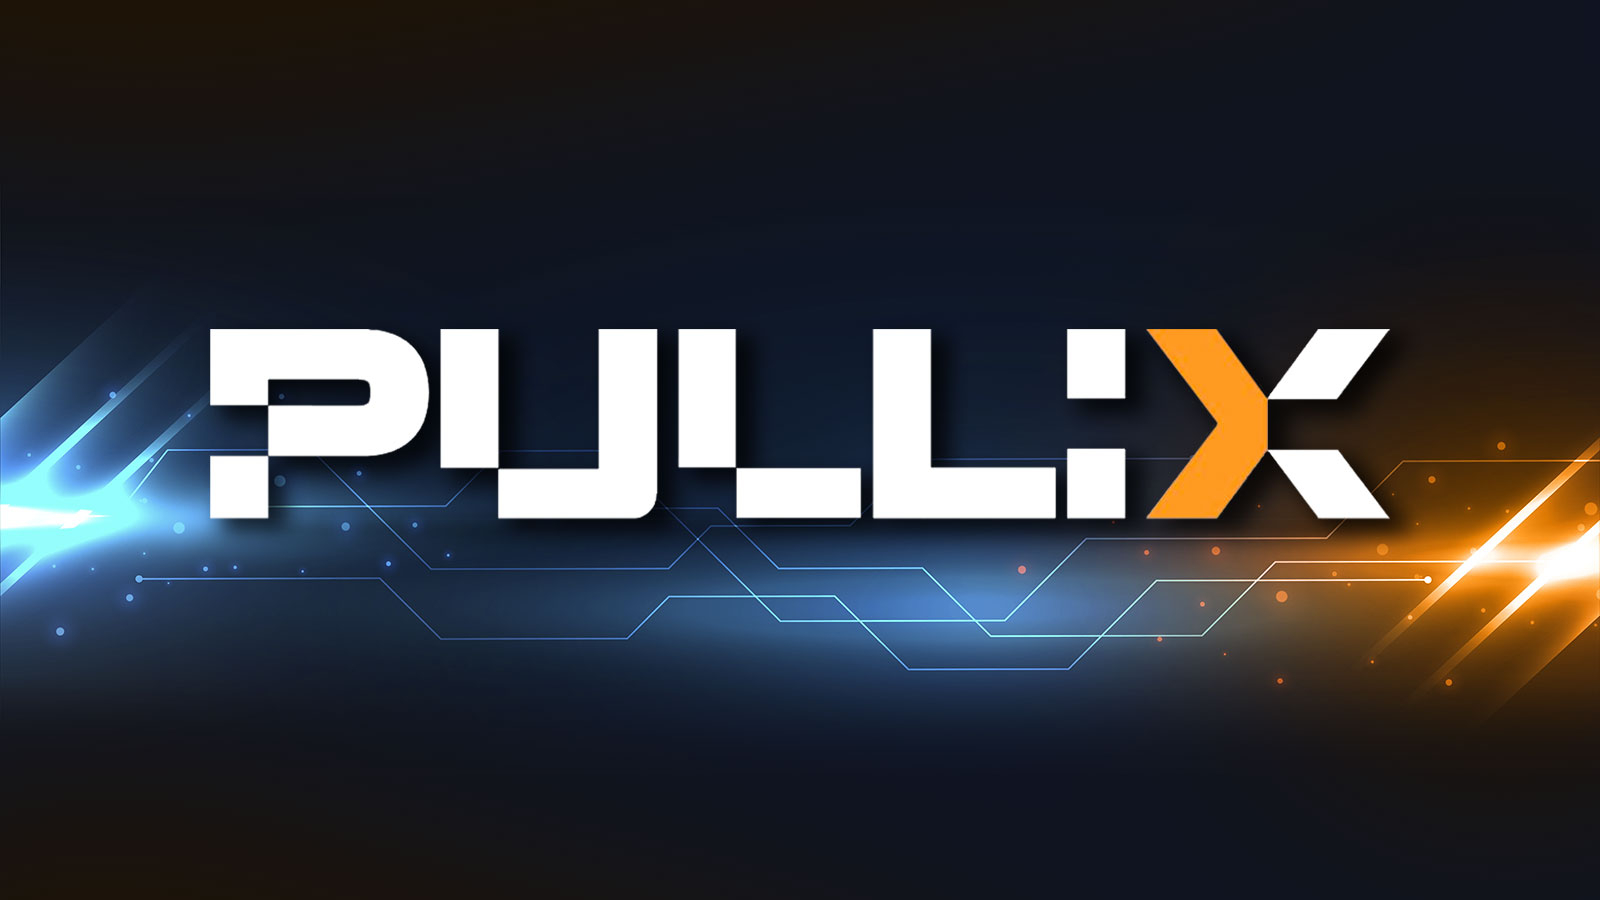 Pullix (PLX) Asset Sale On-Boards New Supporters Cohort while Uniswap (UNI) and Sei (SEI) Excite Audience With Major Announcements